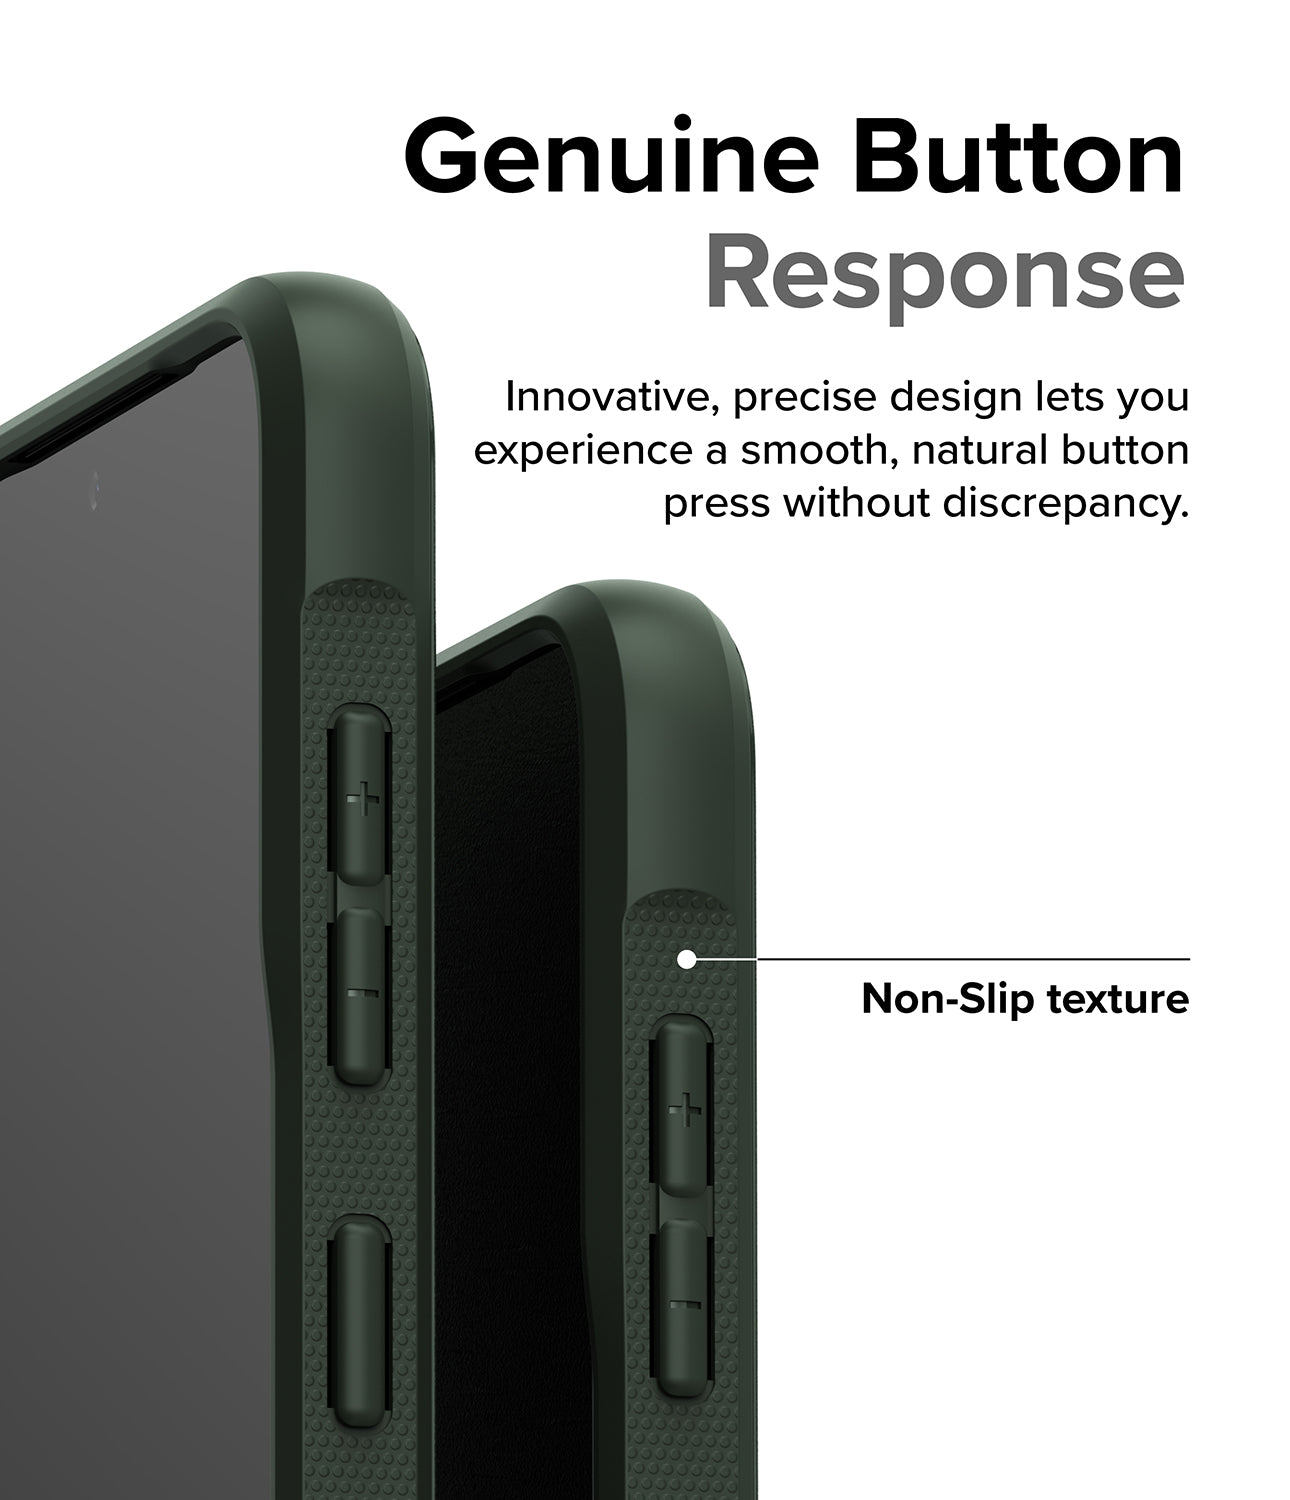 Galaxy S23 Plus Case | Onyx Dark Green - Genuine Button Response. Innovative, precise design lets you experience a smooth, natural button press without discrepancy. Non-Slip texture.